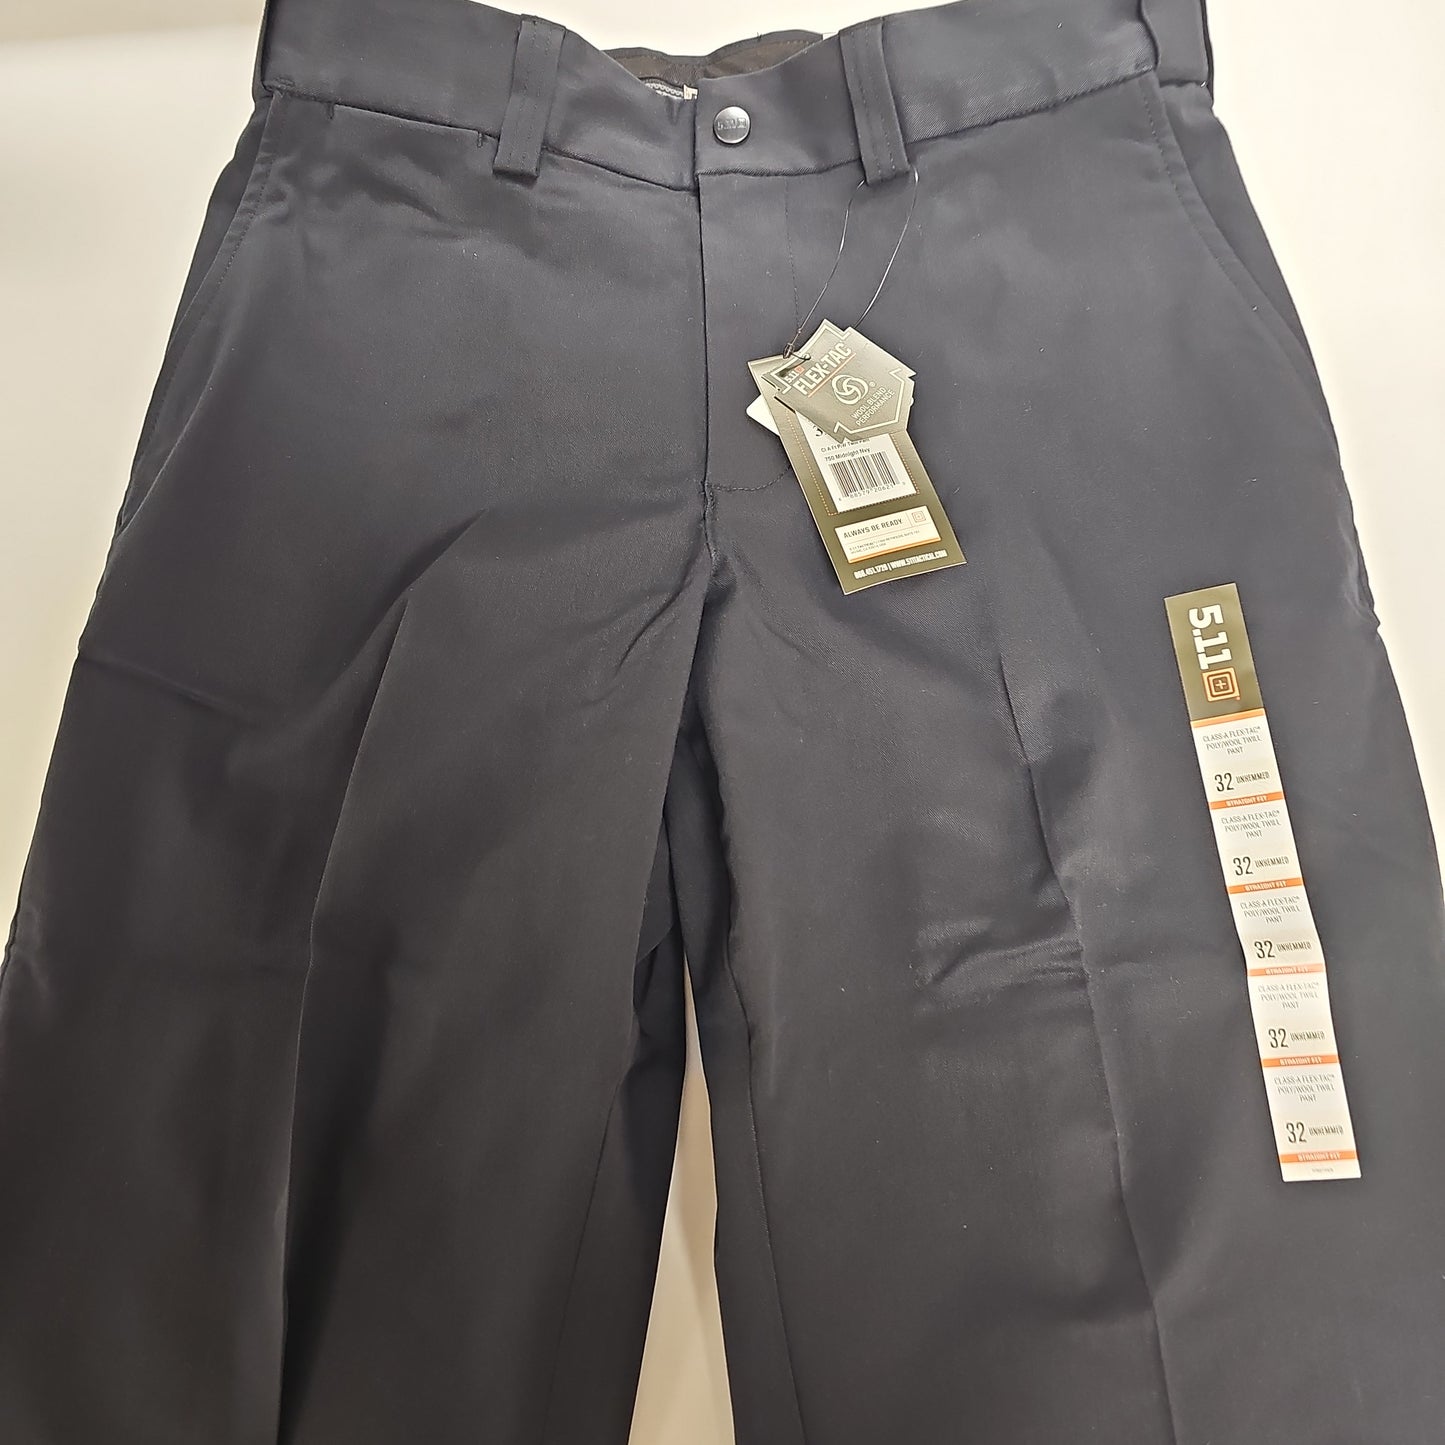 5.11 Tactical Pant Twill, FT PolyWool Class-A Midnight Navy, 32 74492-750-32